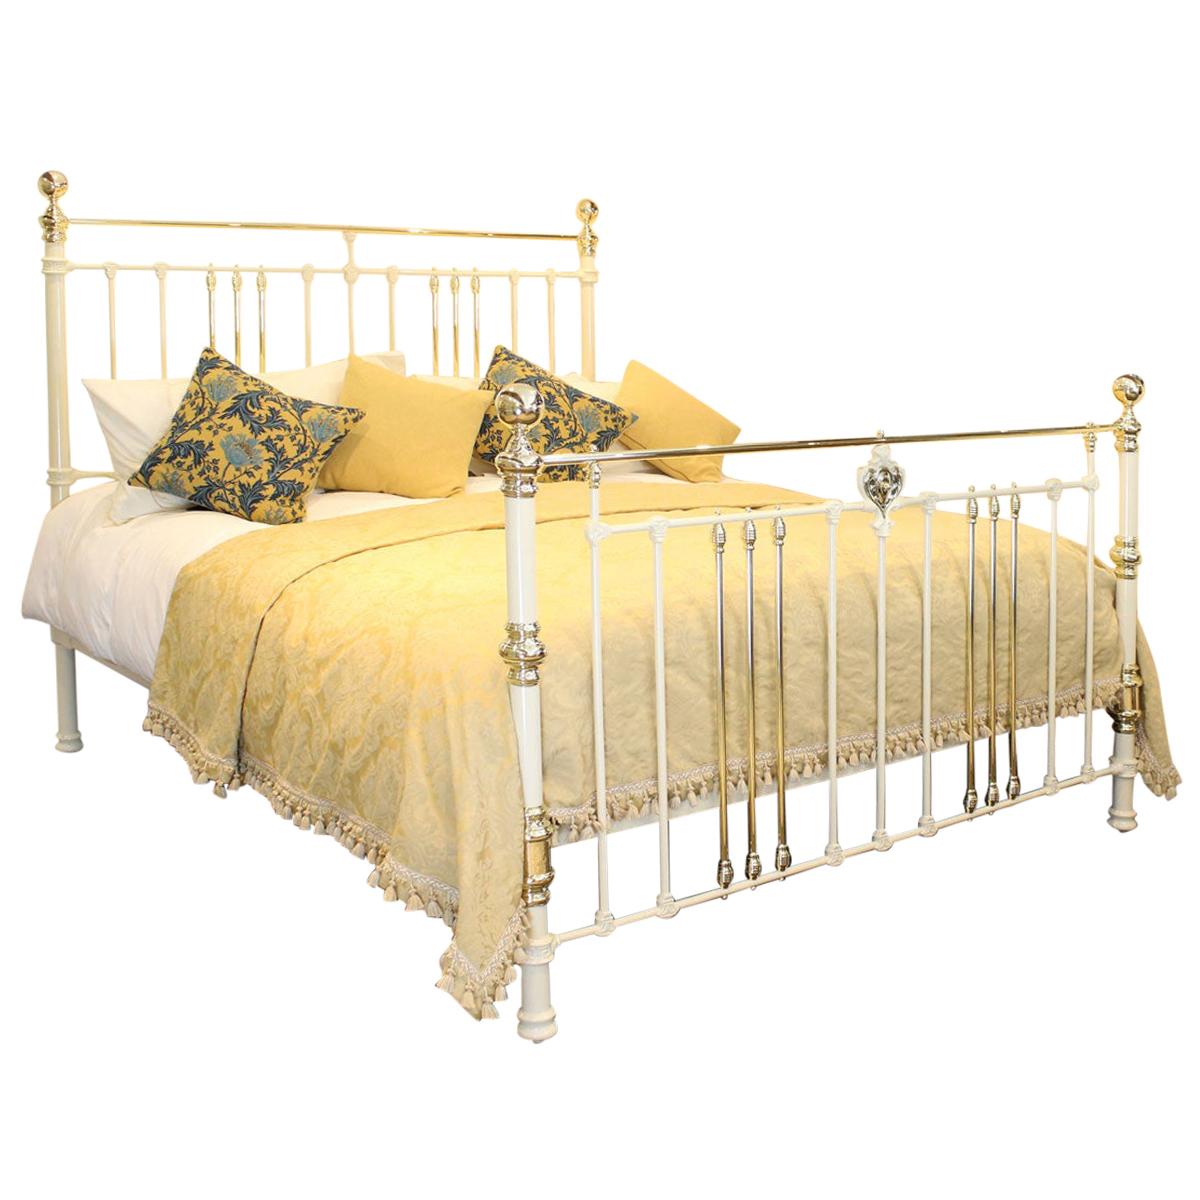 Quality Cast Iron Bed in Cream, MSK58